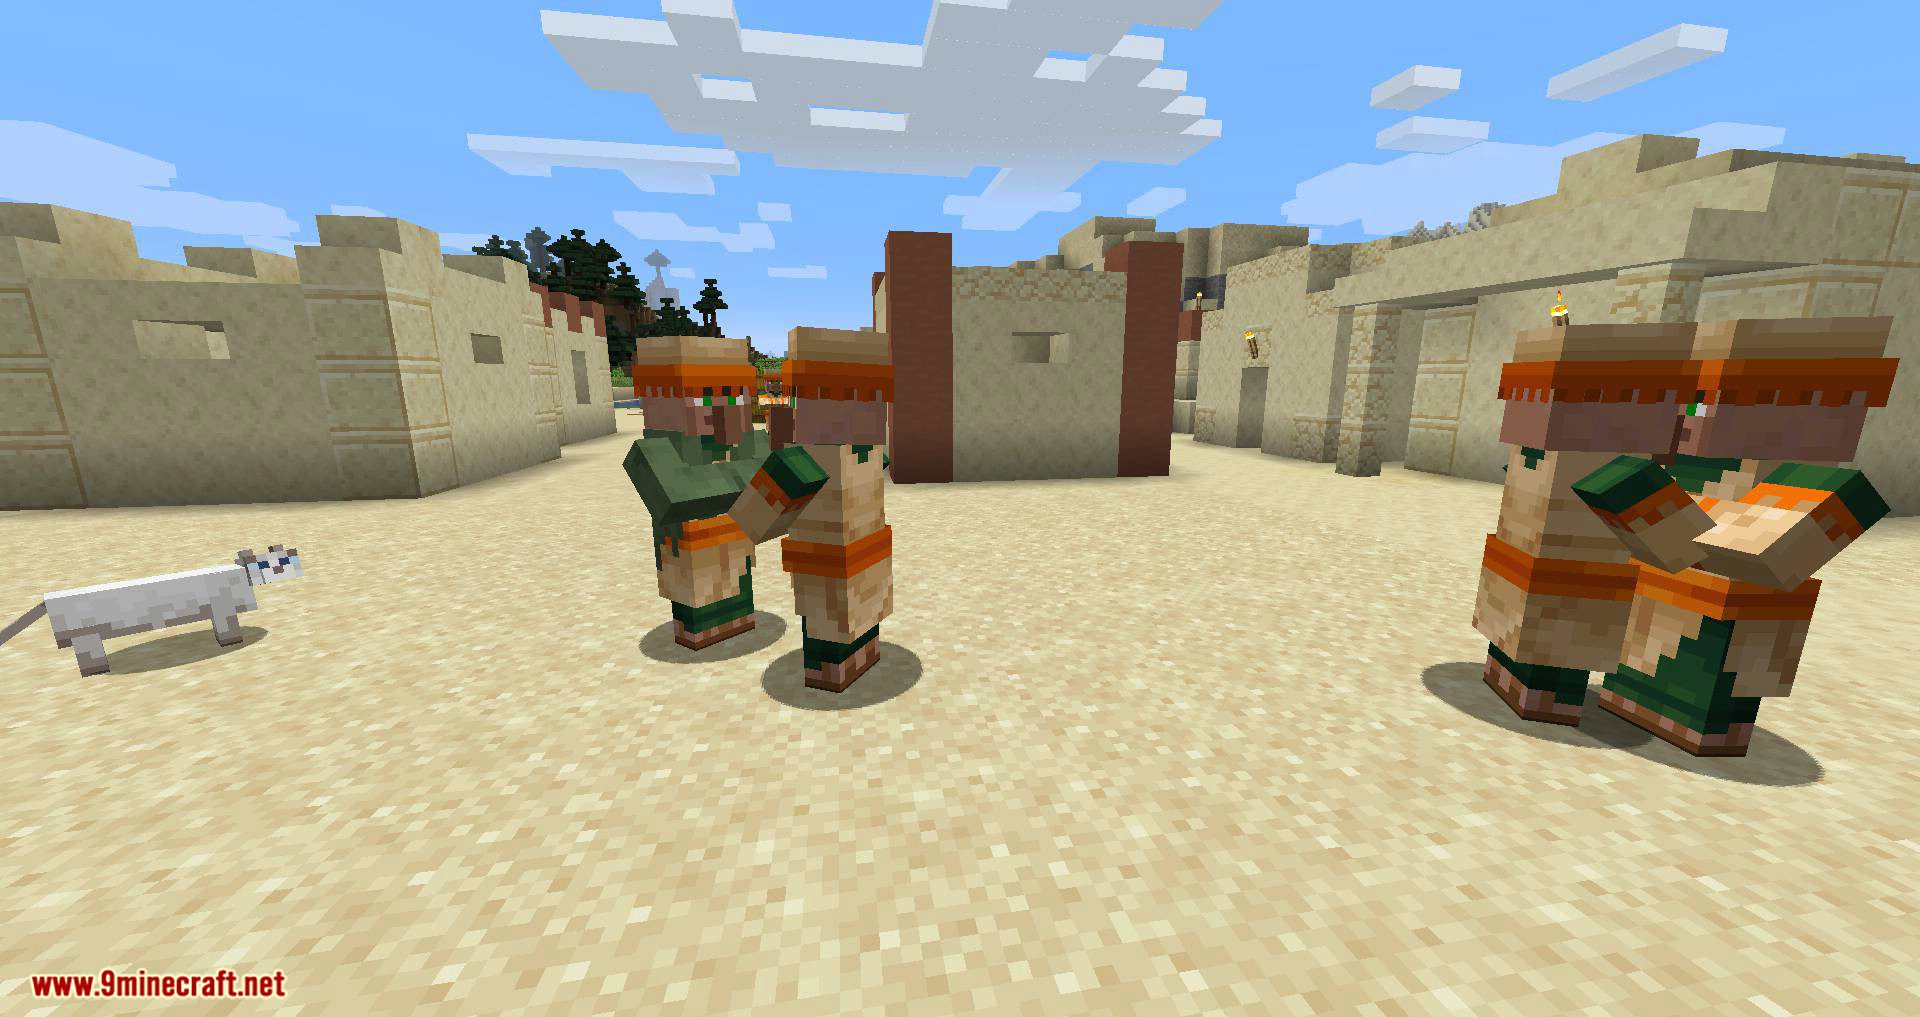 All Mobs Attack Villagers Mod 1.15.2, 1.14.4 (More Chaos in the Village in Night) 2